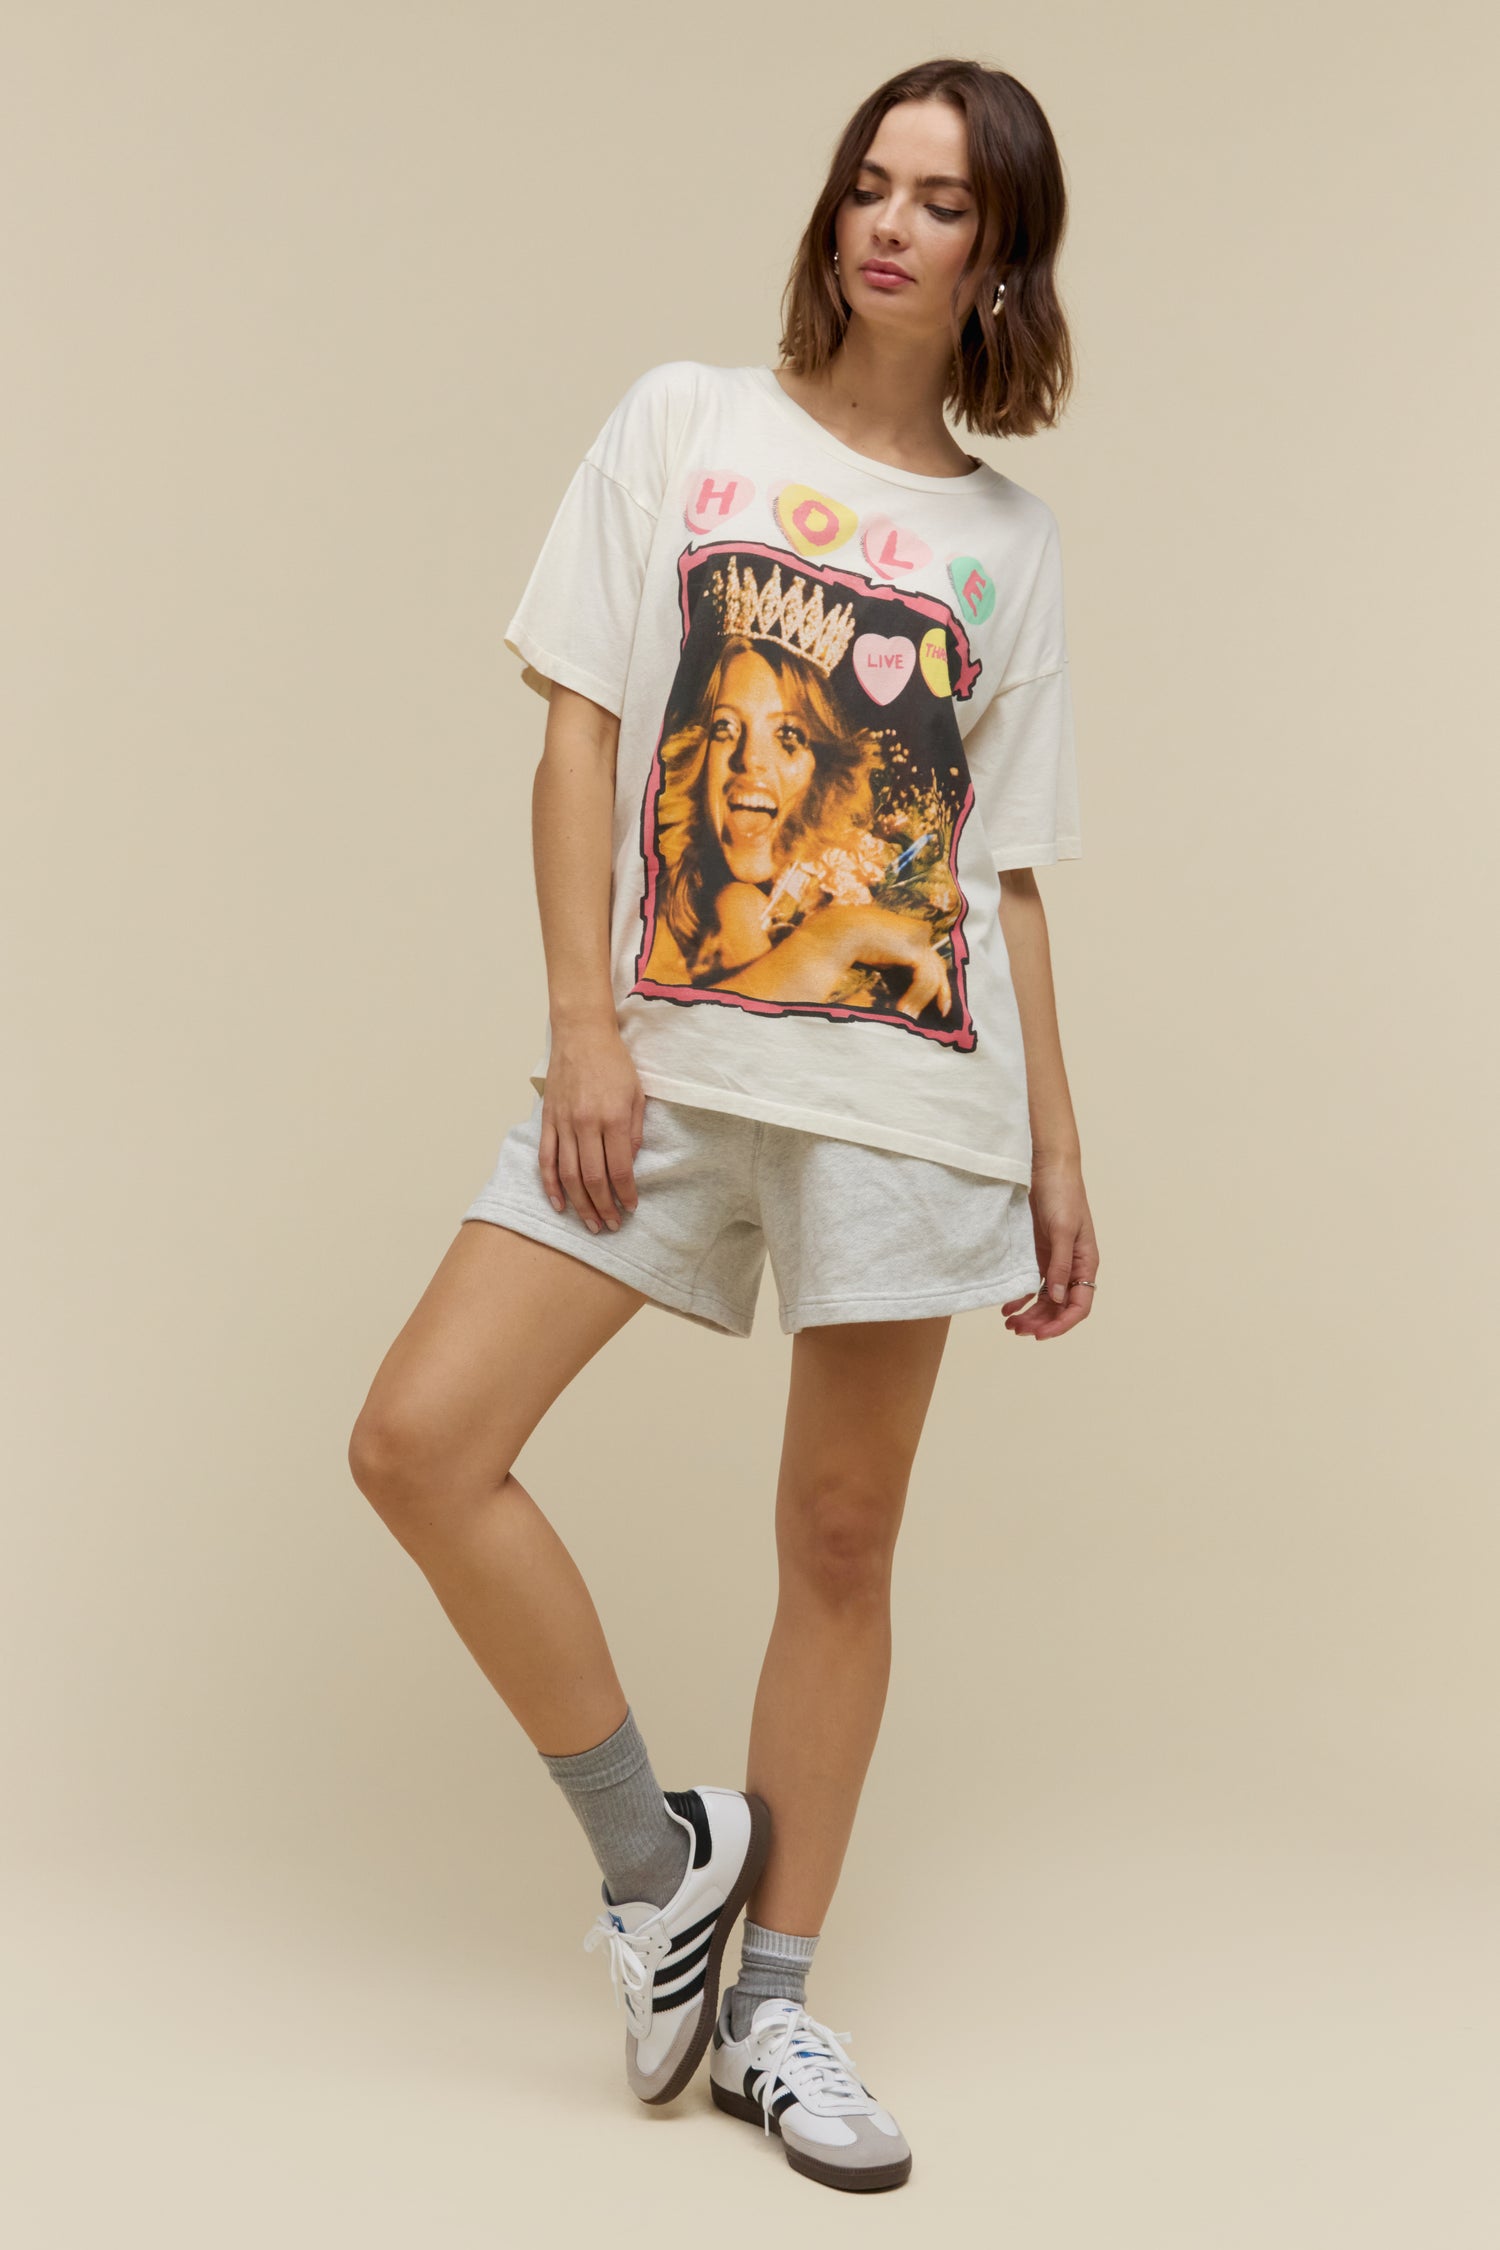 Model wearing a 90s Hole merch tee with grungy, poster style designed with the original artwork from Hole’s second studio album “Live Through This.” The tour details stamped along the back.